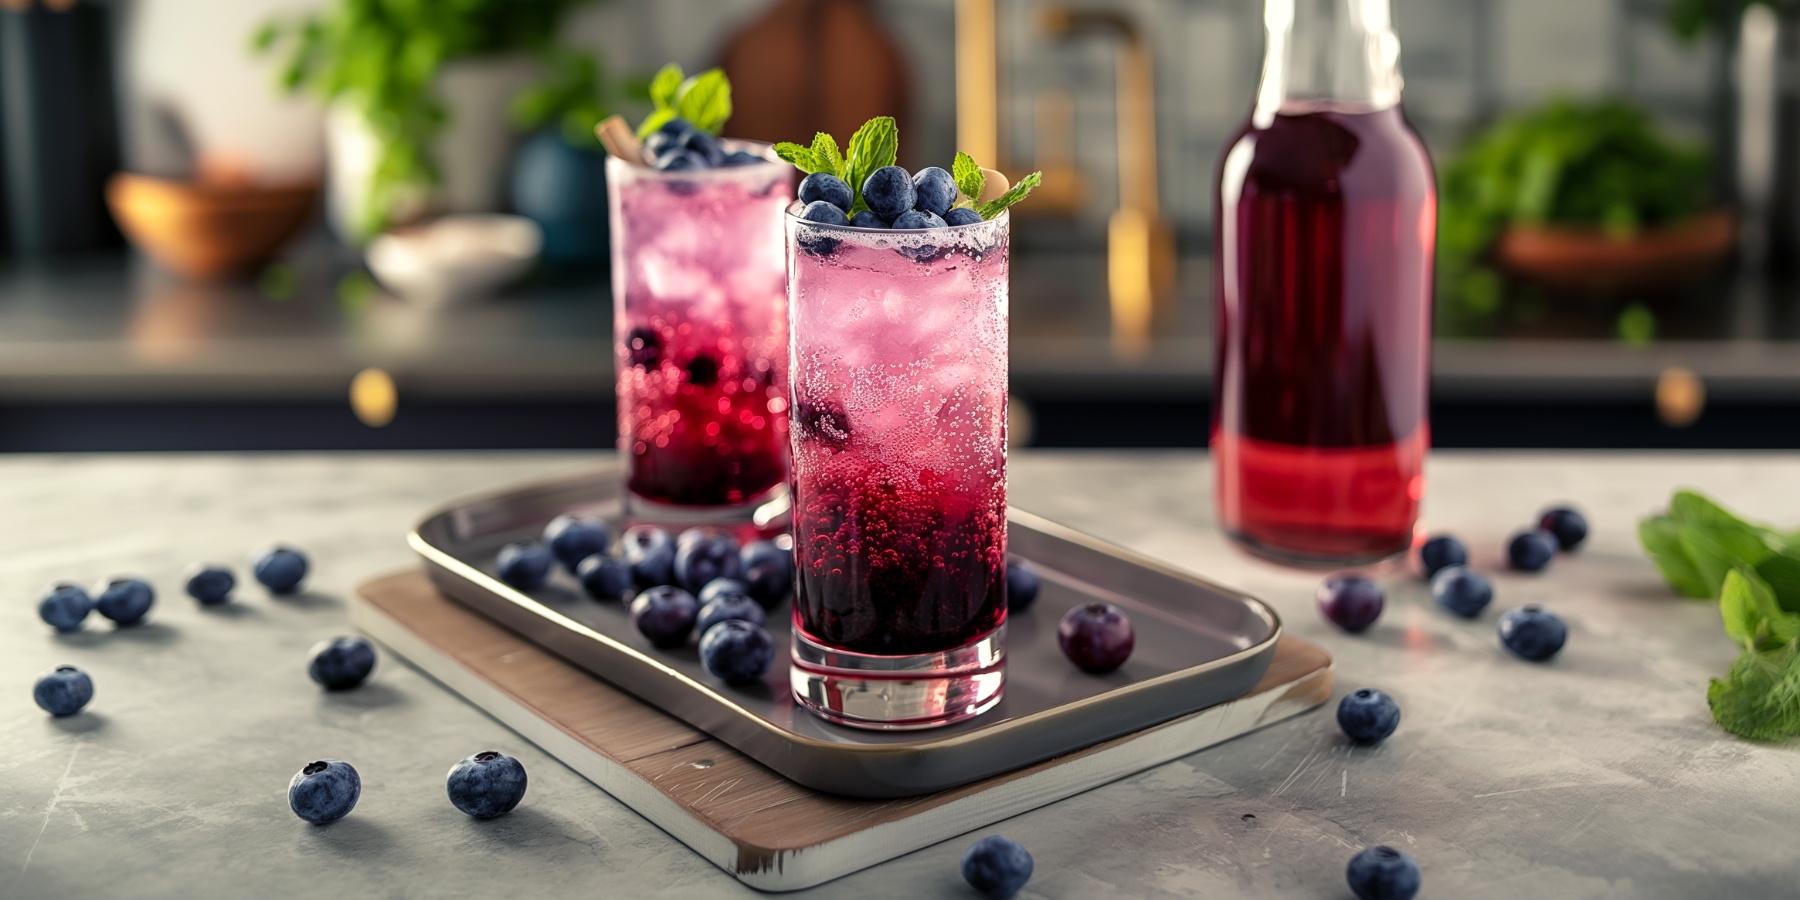 Two vibrant cocktails made with a blue curacao blueberry syrup substitute